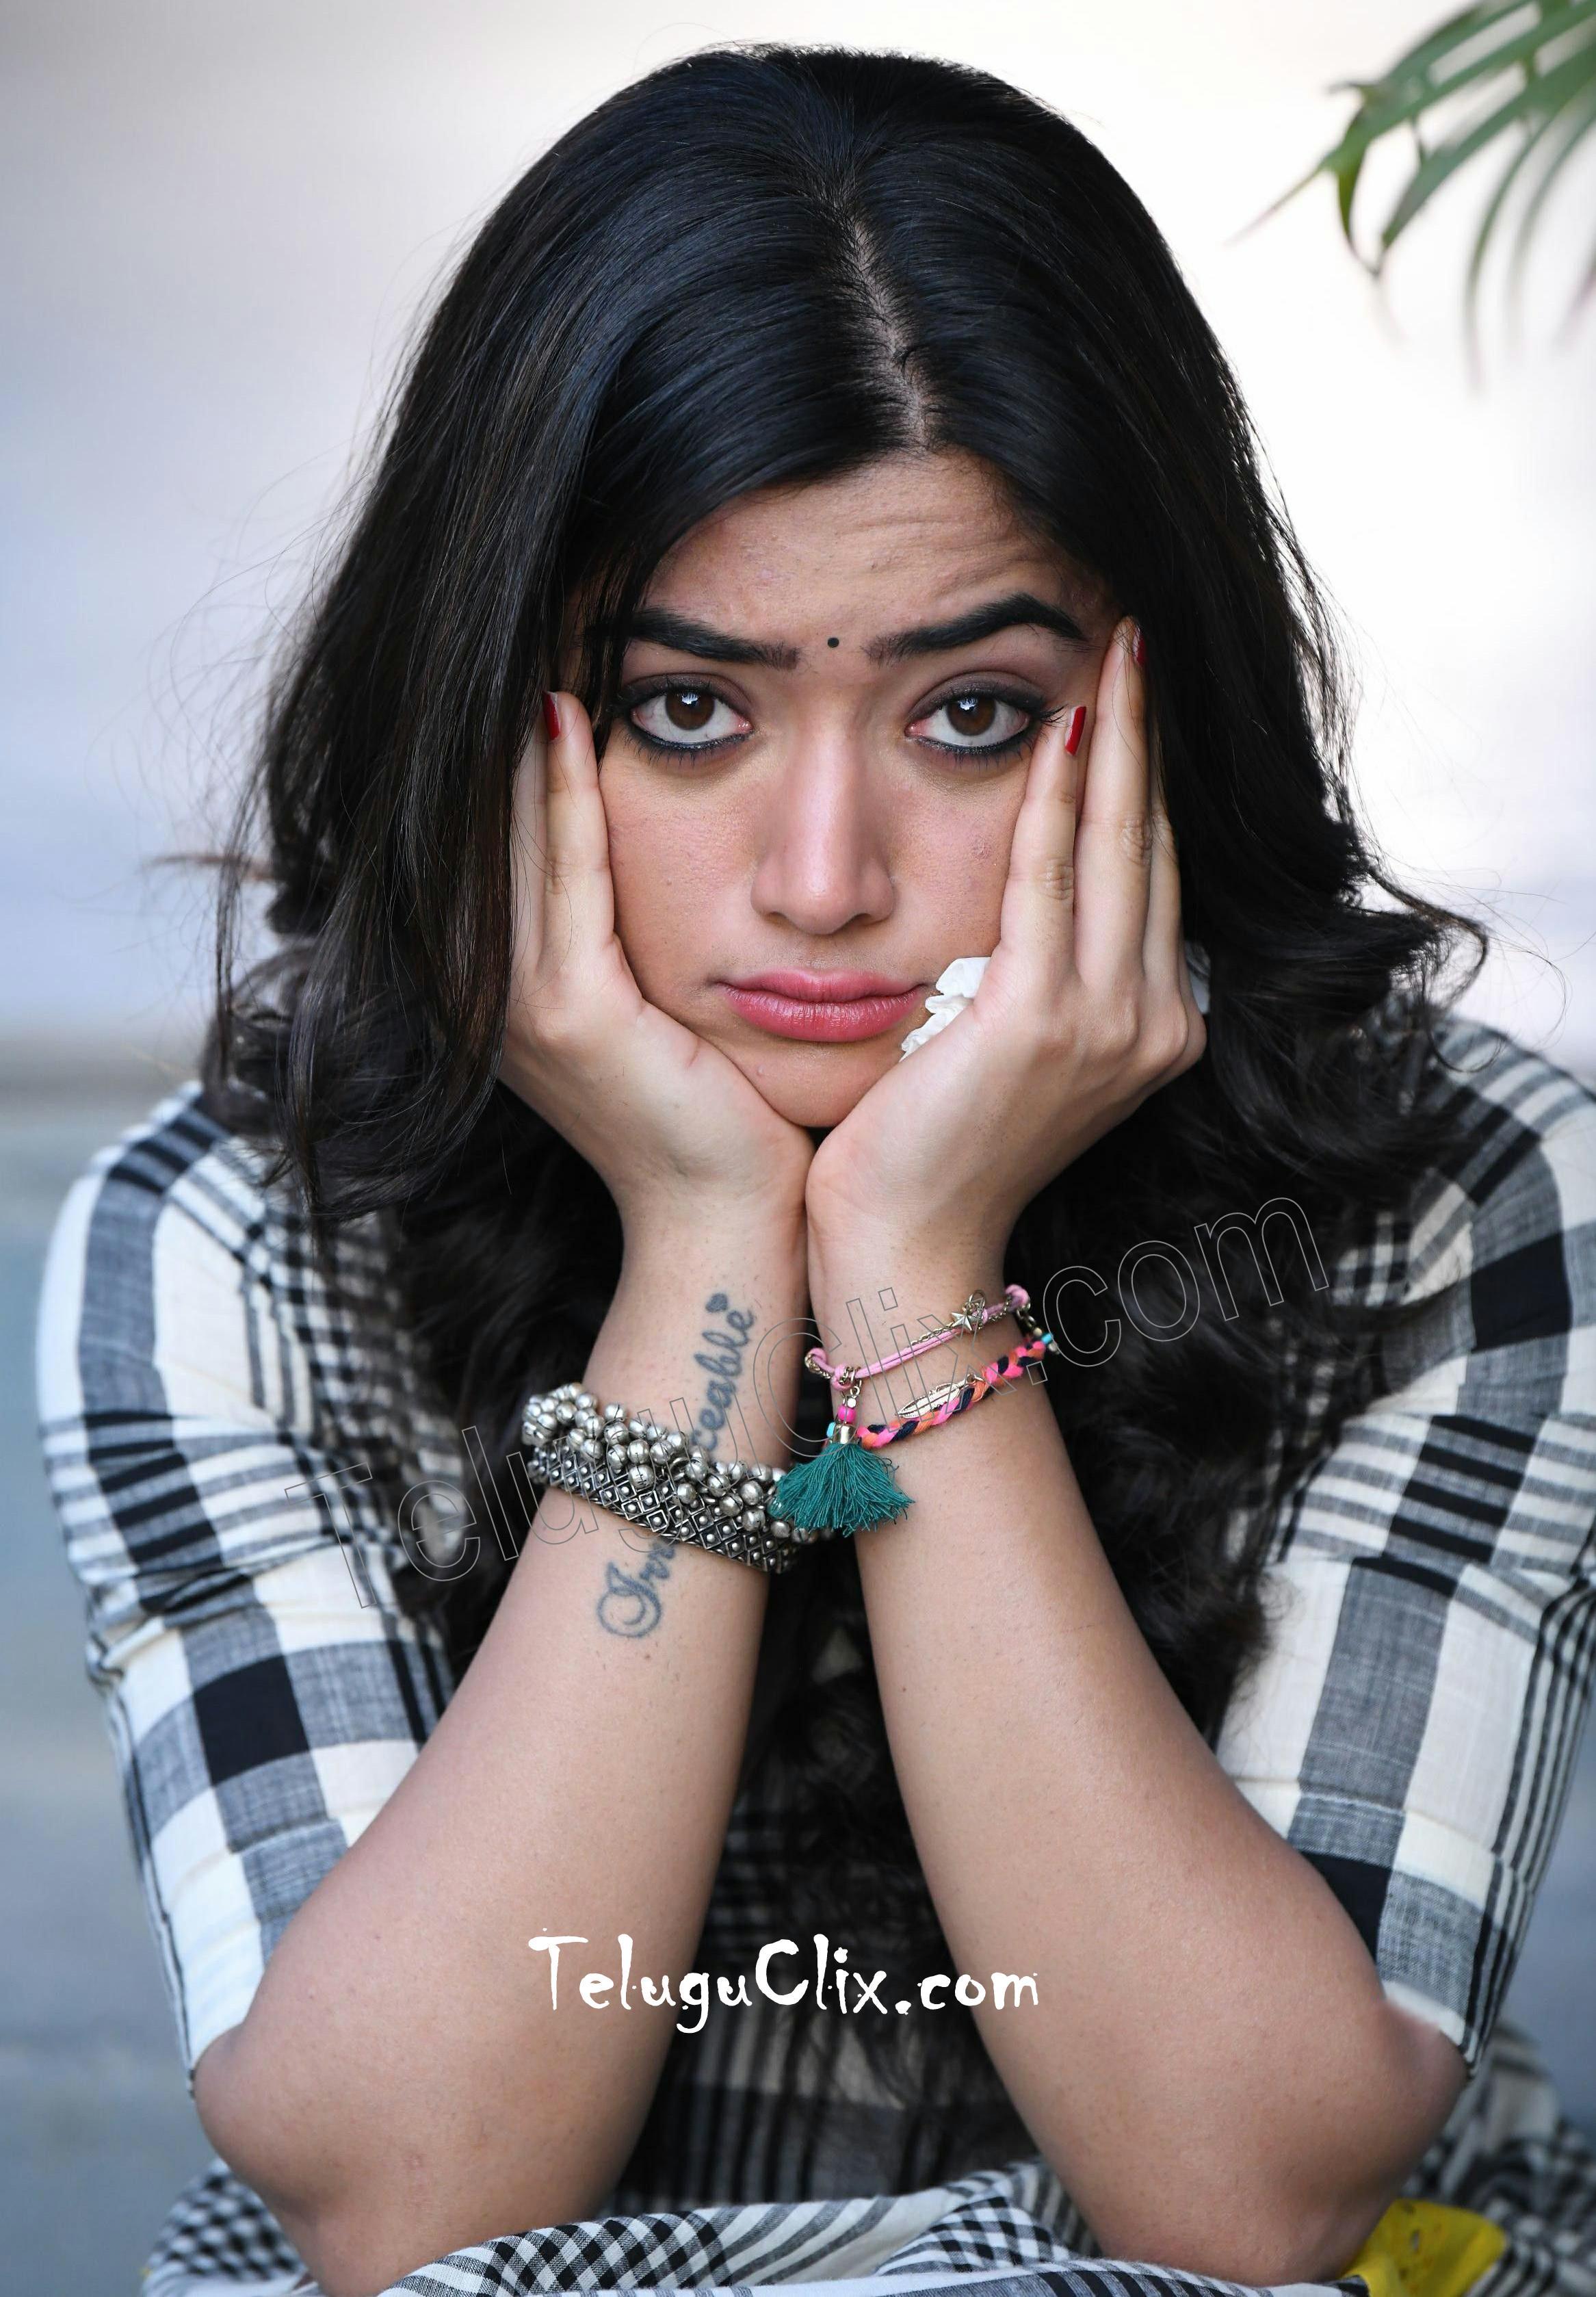 Rashmika Hd 4k Wallpapers Top Free Rashmika Hd 4k Backgrounds Wallpaperaccess Available screen resolutions to download are from 1080p to 2k, completely free only on filmibeat wallpapers. rashmika hd 4k wallpapers top free